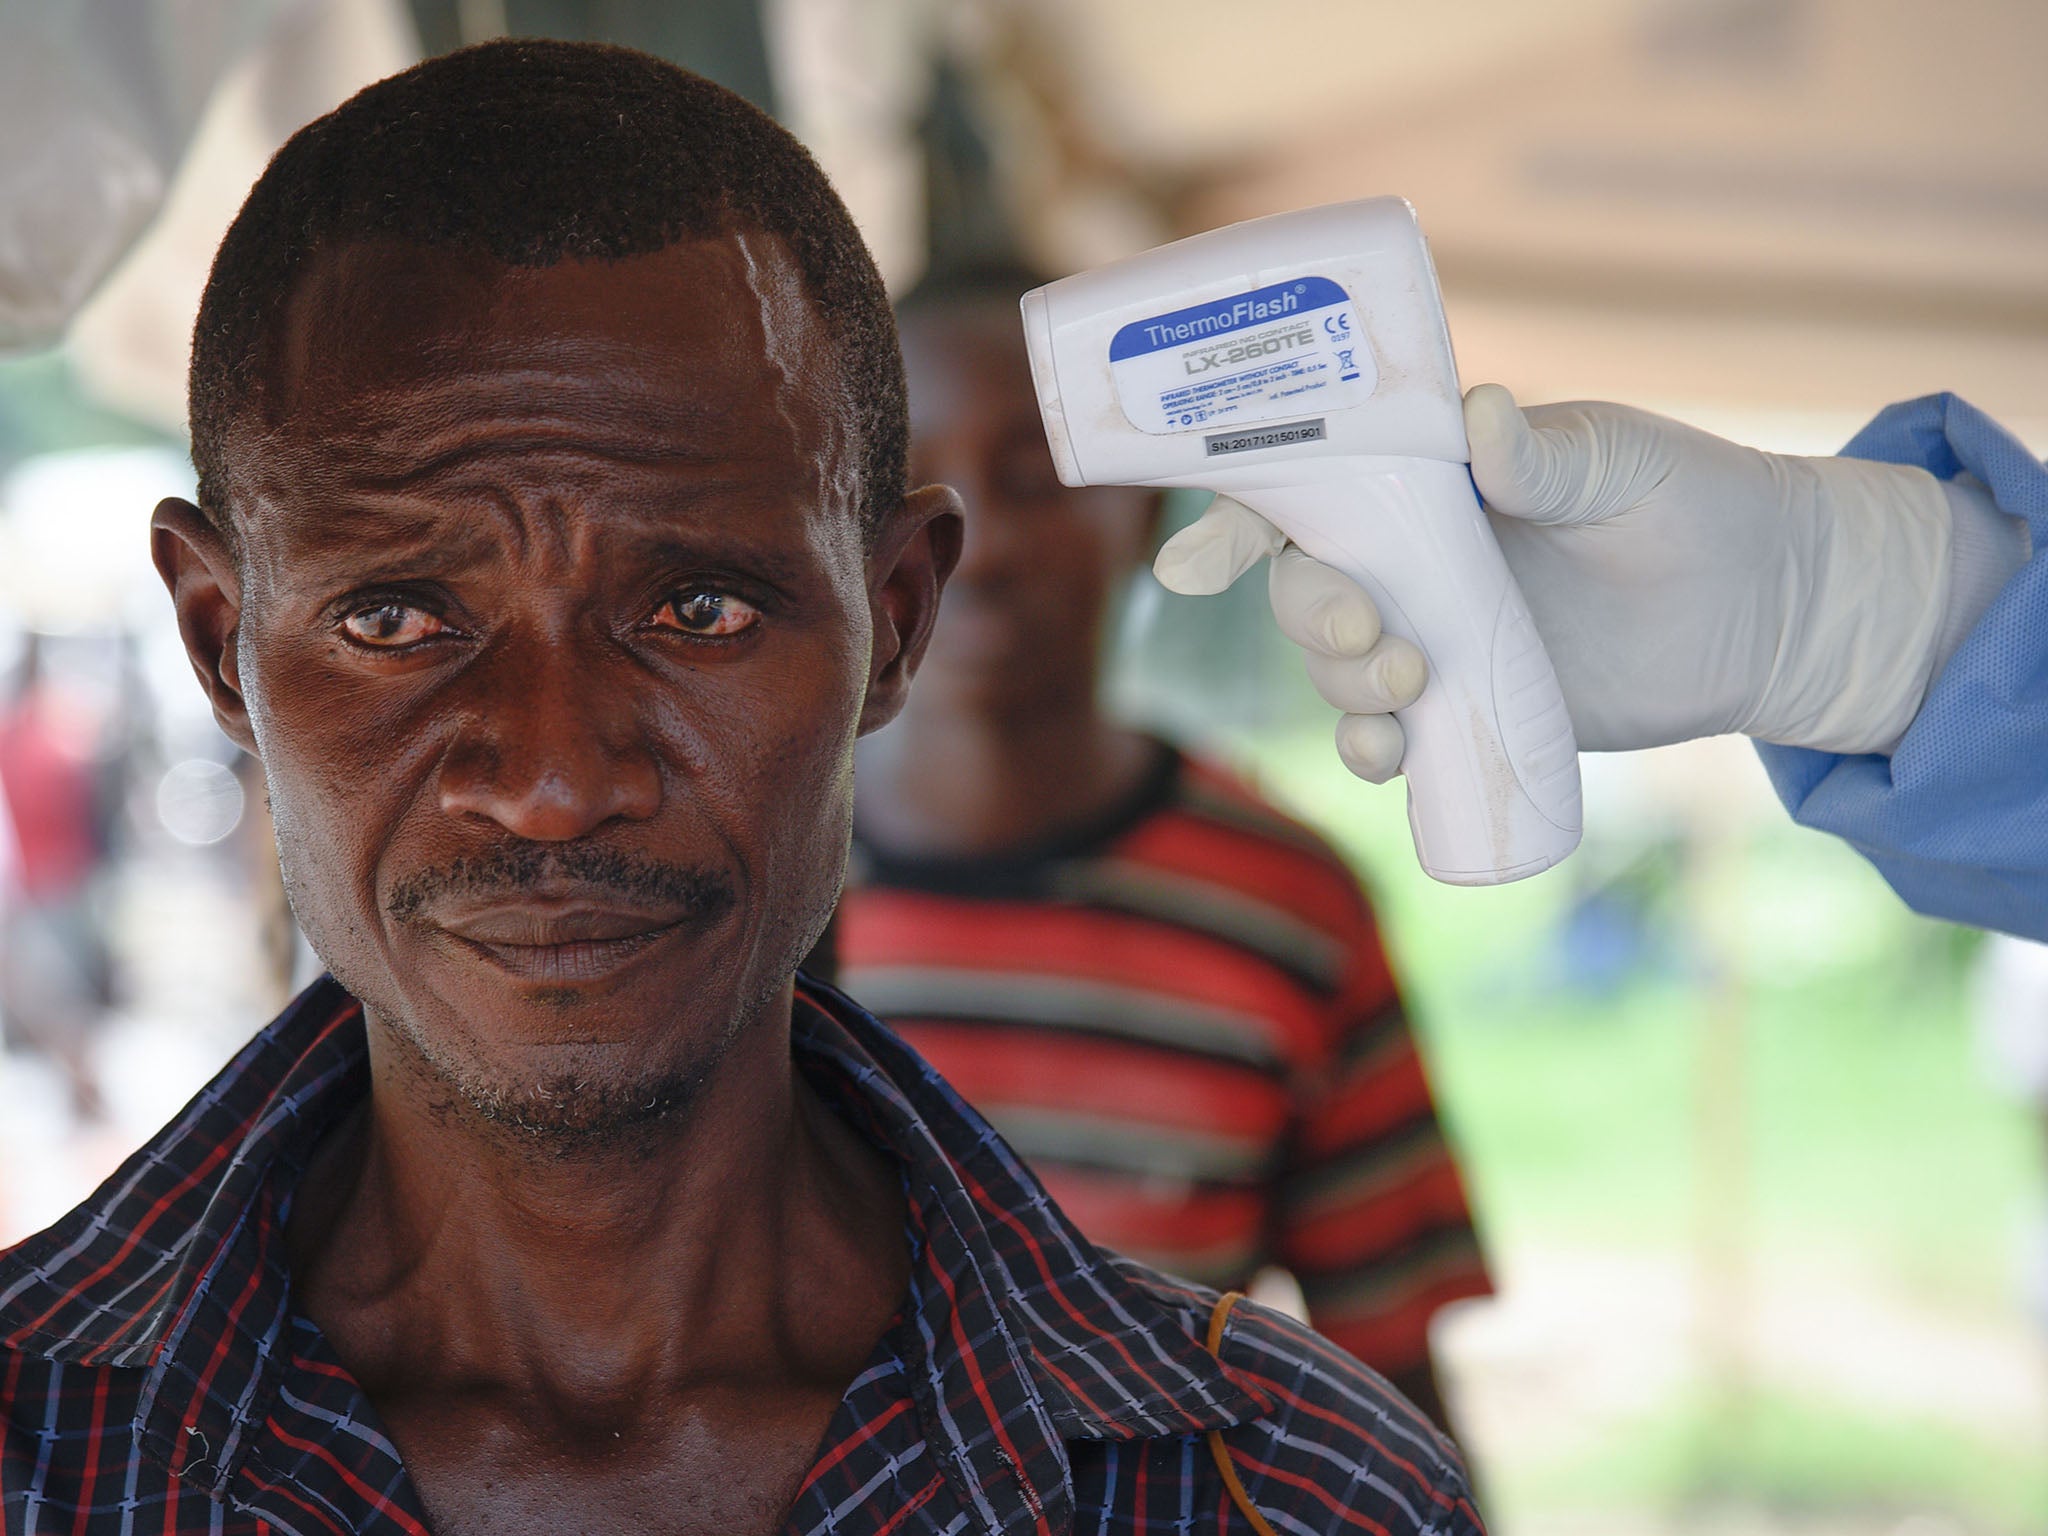 A man from DRC has his temperature checked by a non-contact thermometer at the Ebola screening point bordering with DRC in Mpondwe, western Uganda (AFP/Getty)